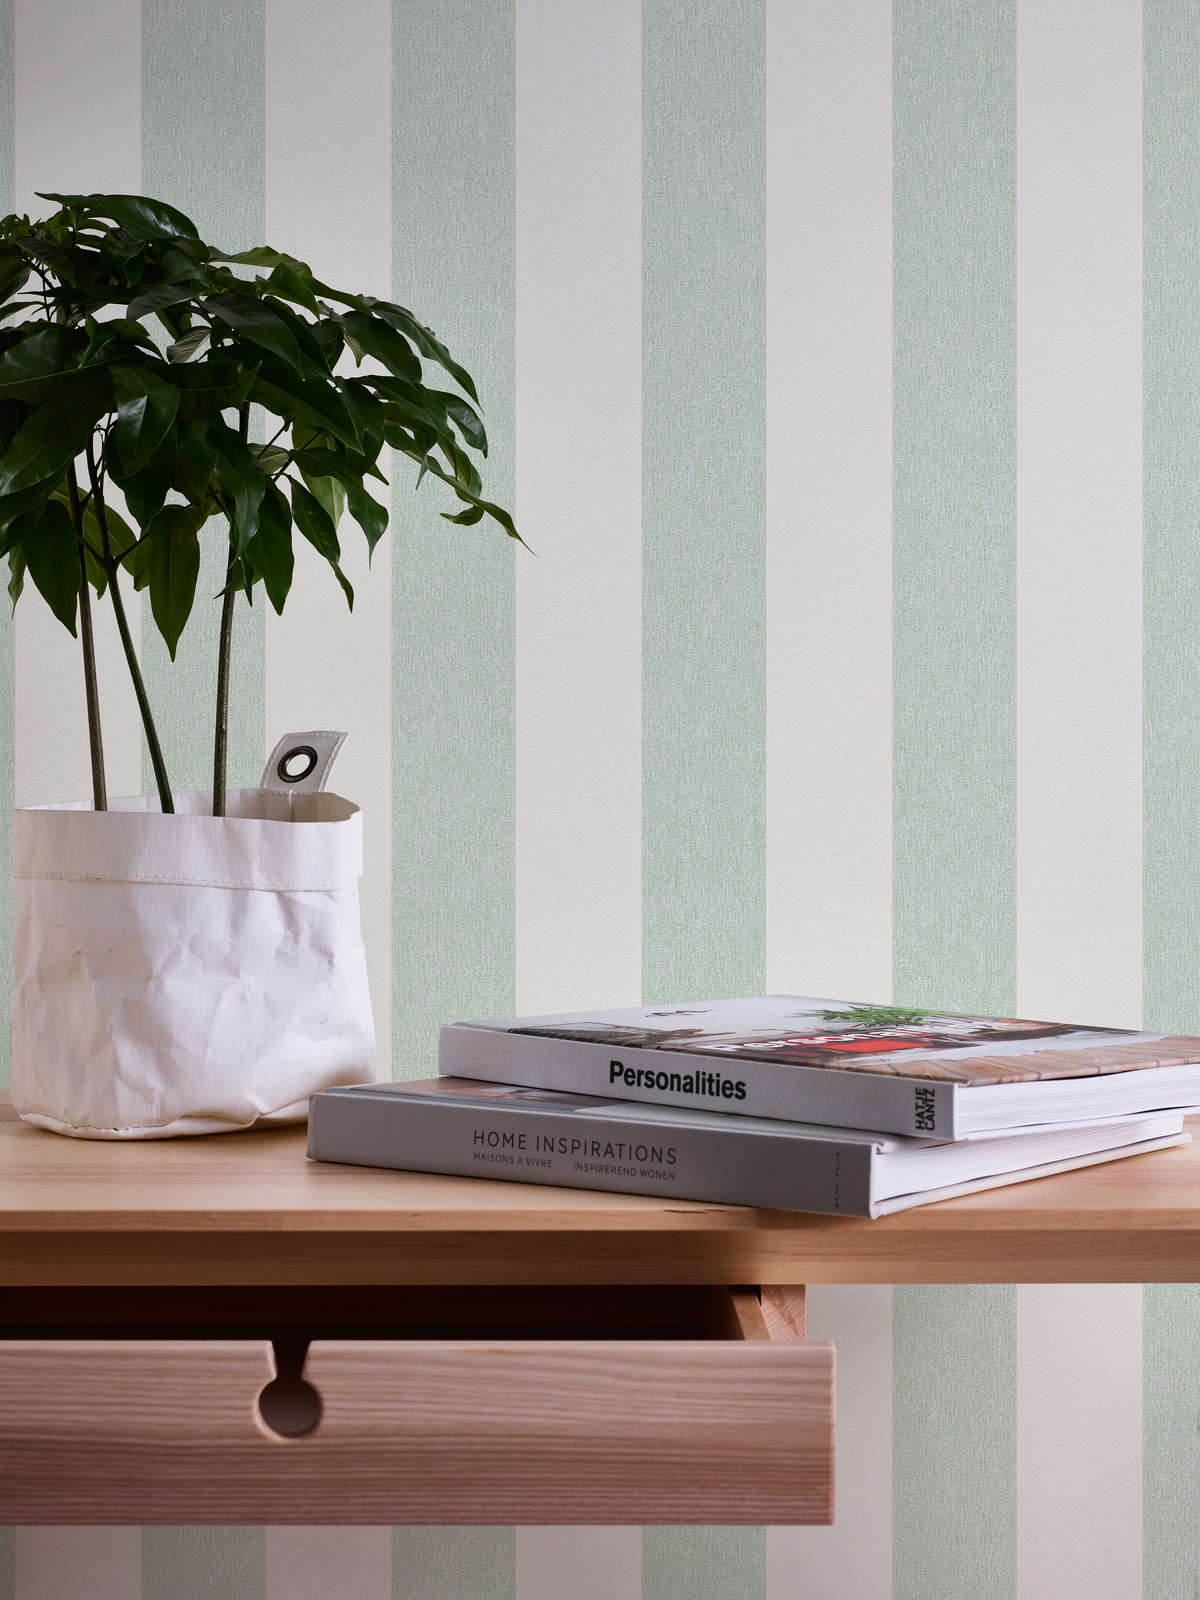             Non-woven wallpaper with stripes in textured look & matt - green, white
        